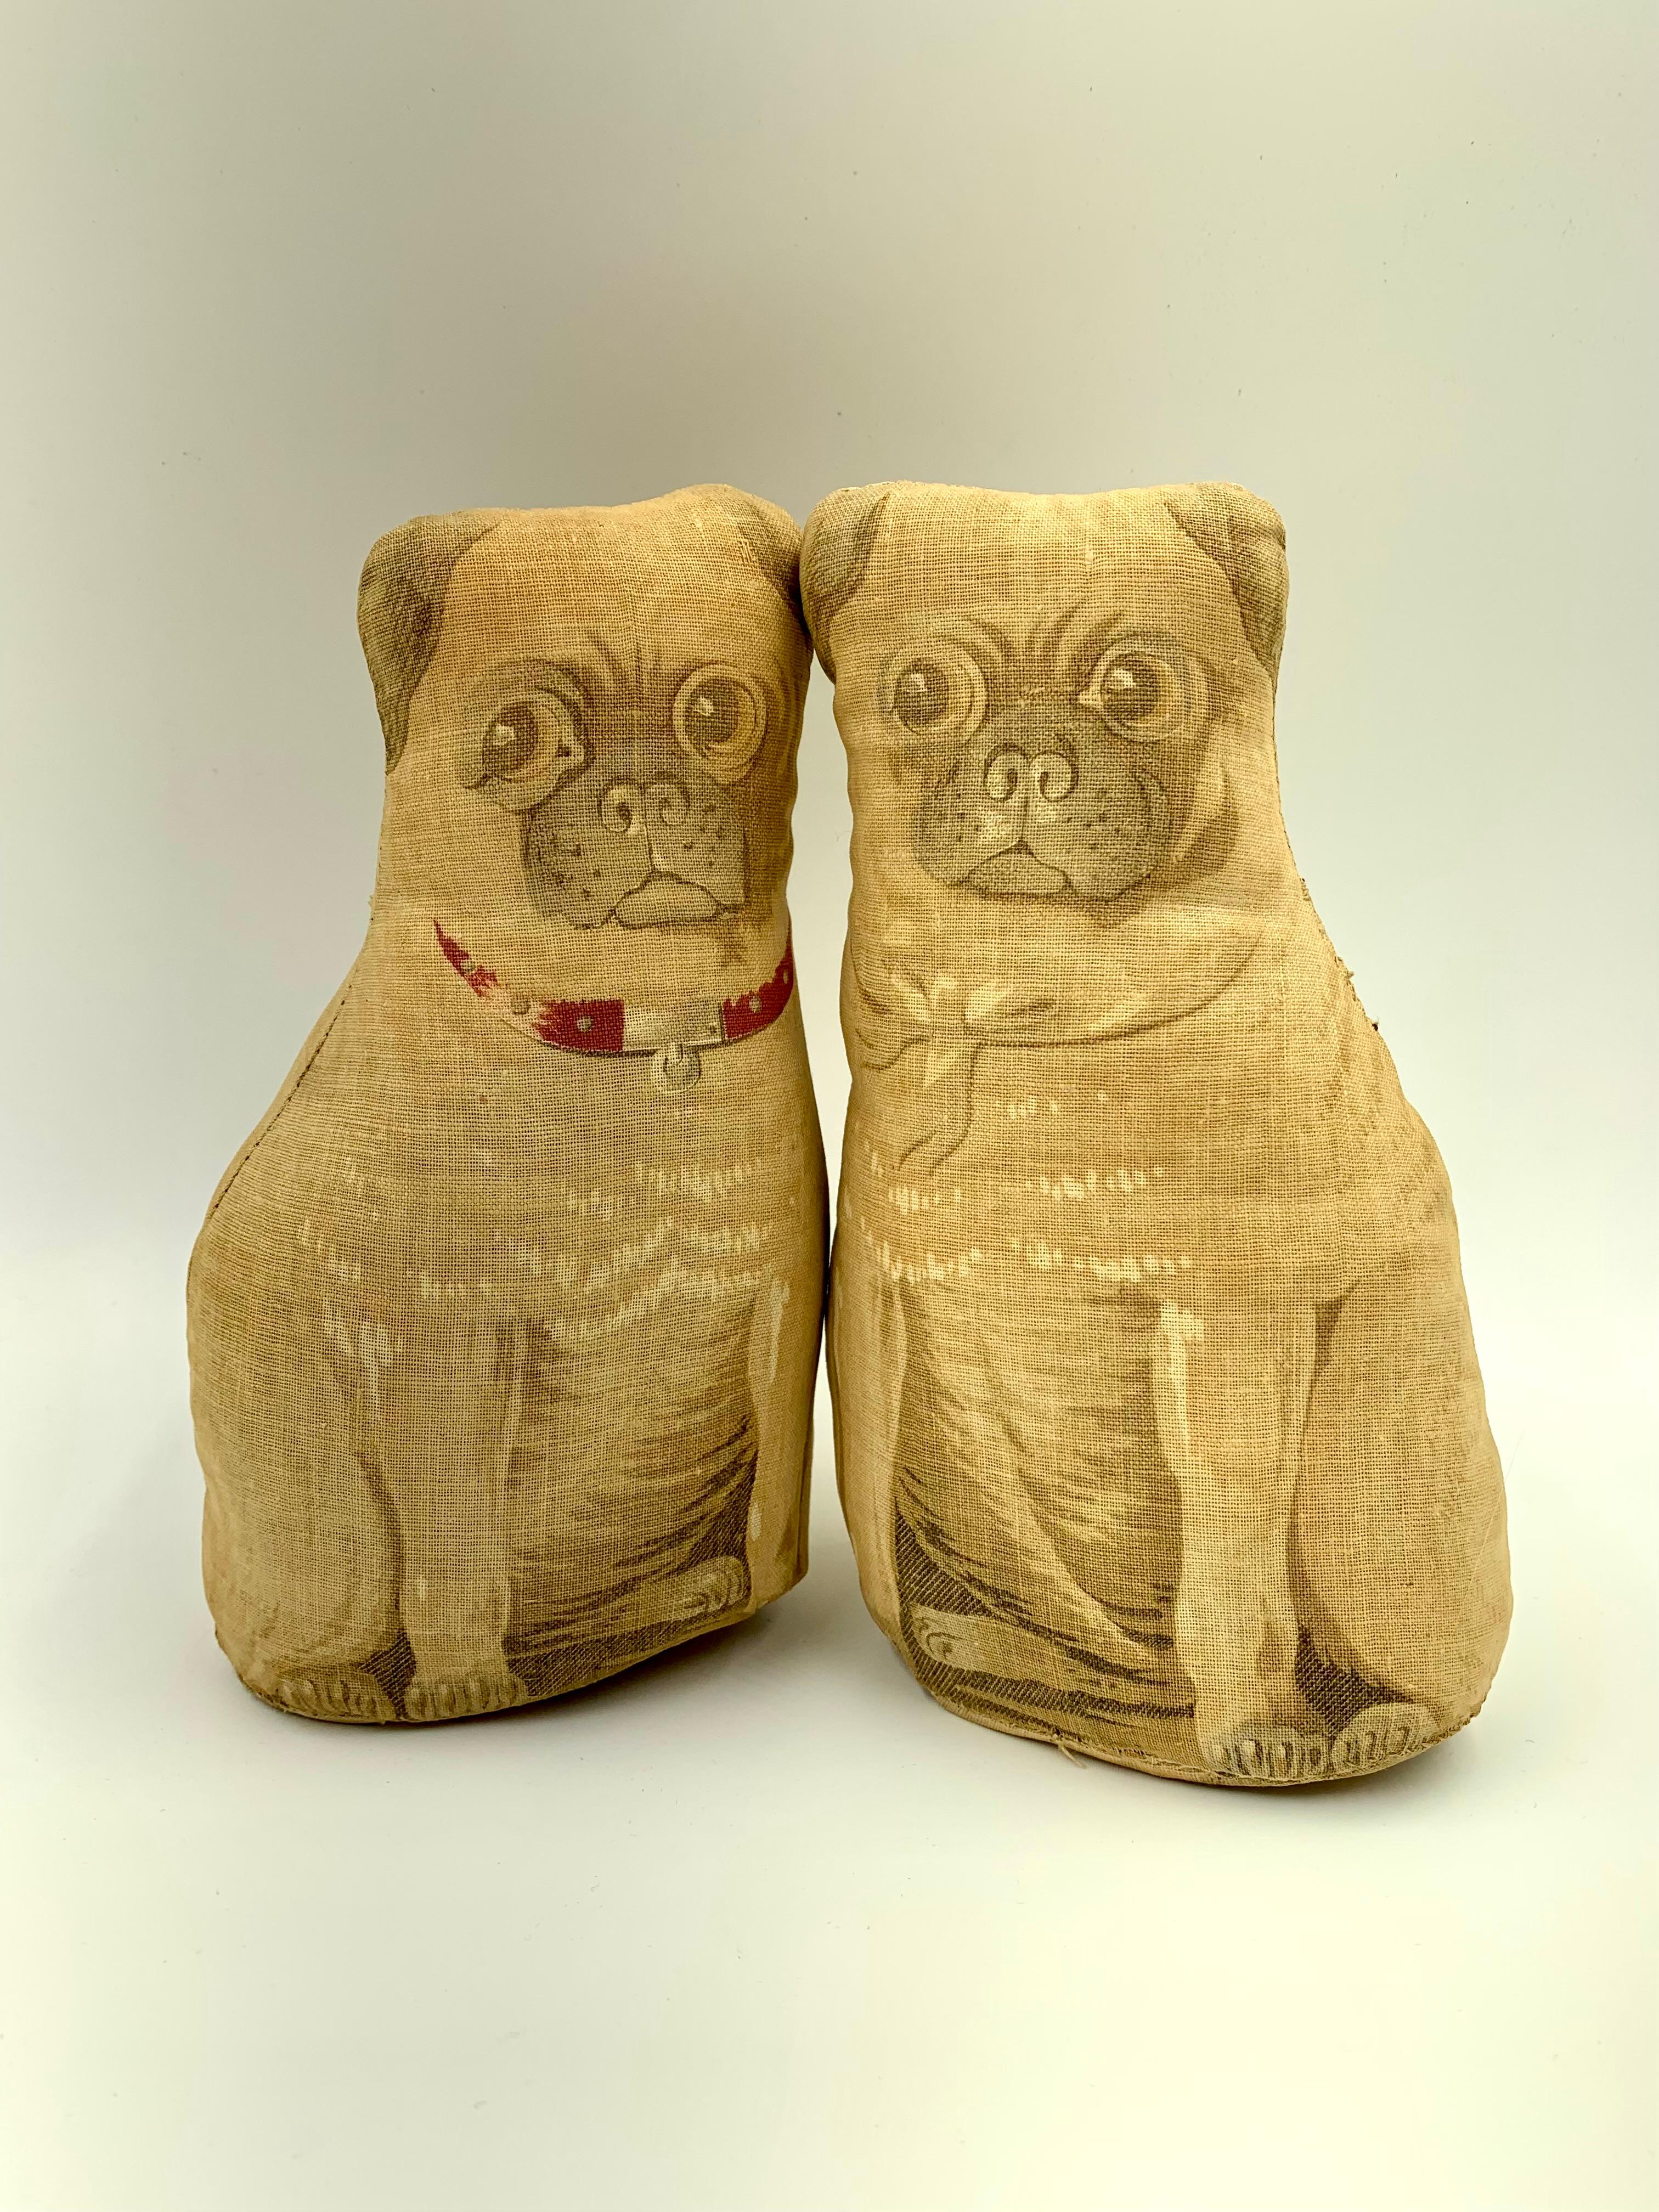 Rare Charming Pair of Early 20th Century Printed Cotton Pug Pillows For Sale 3